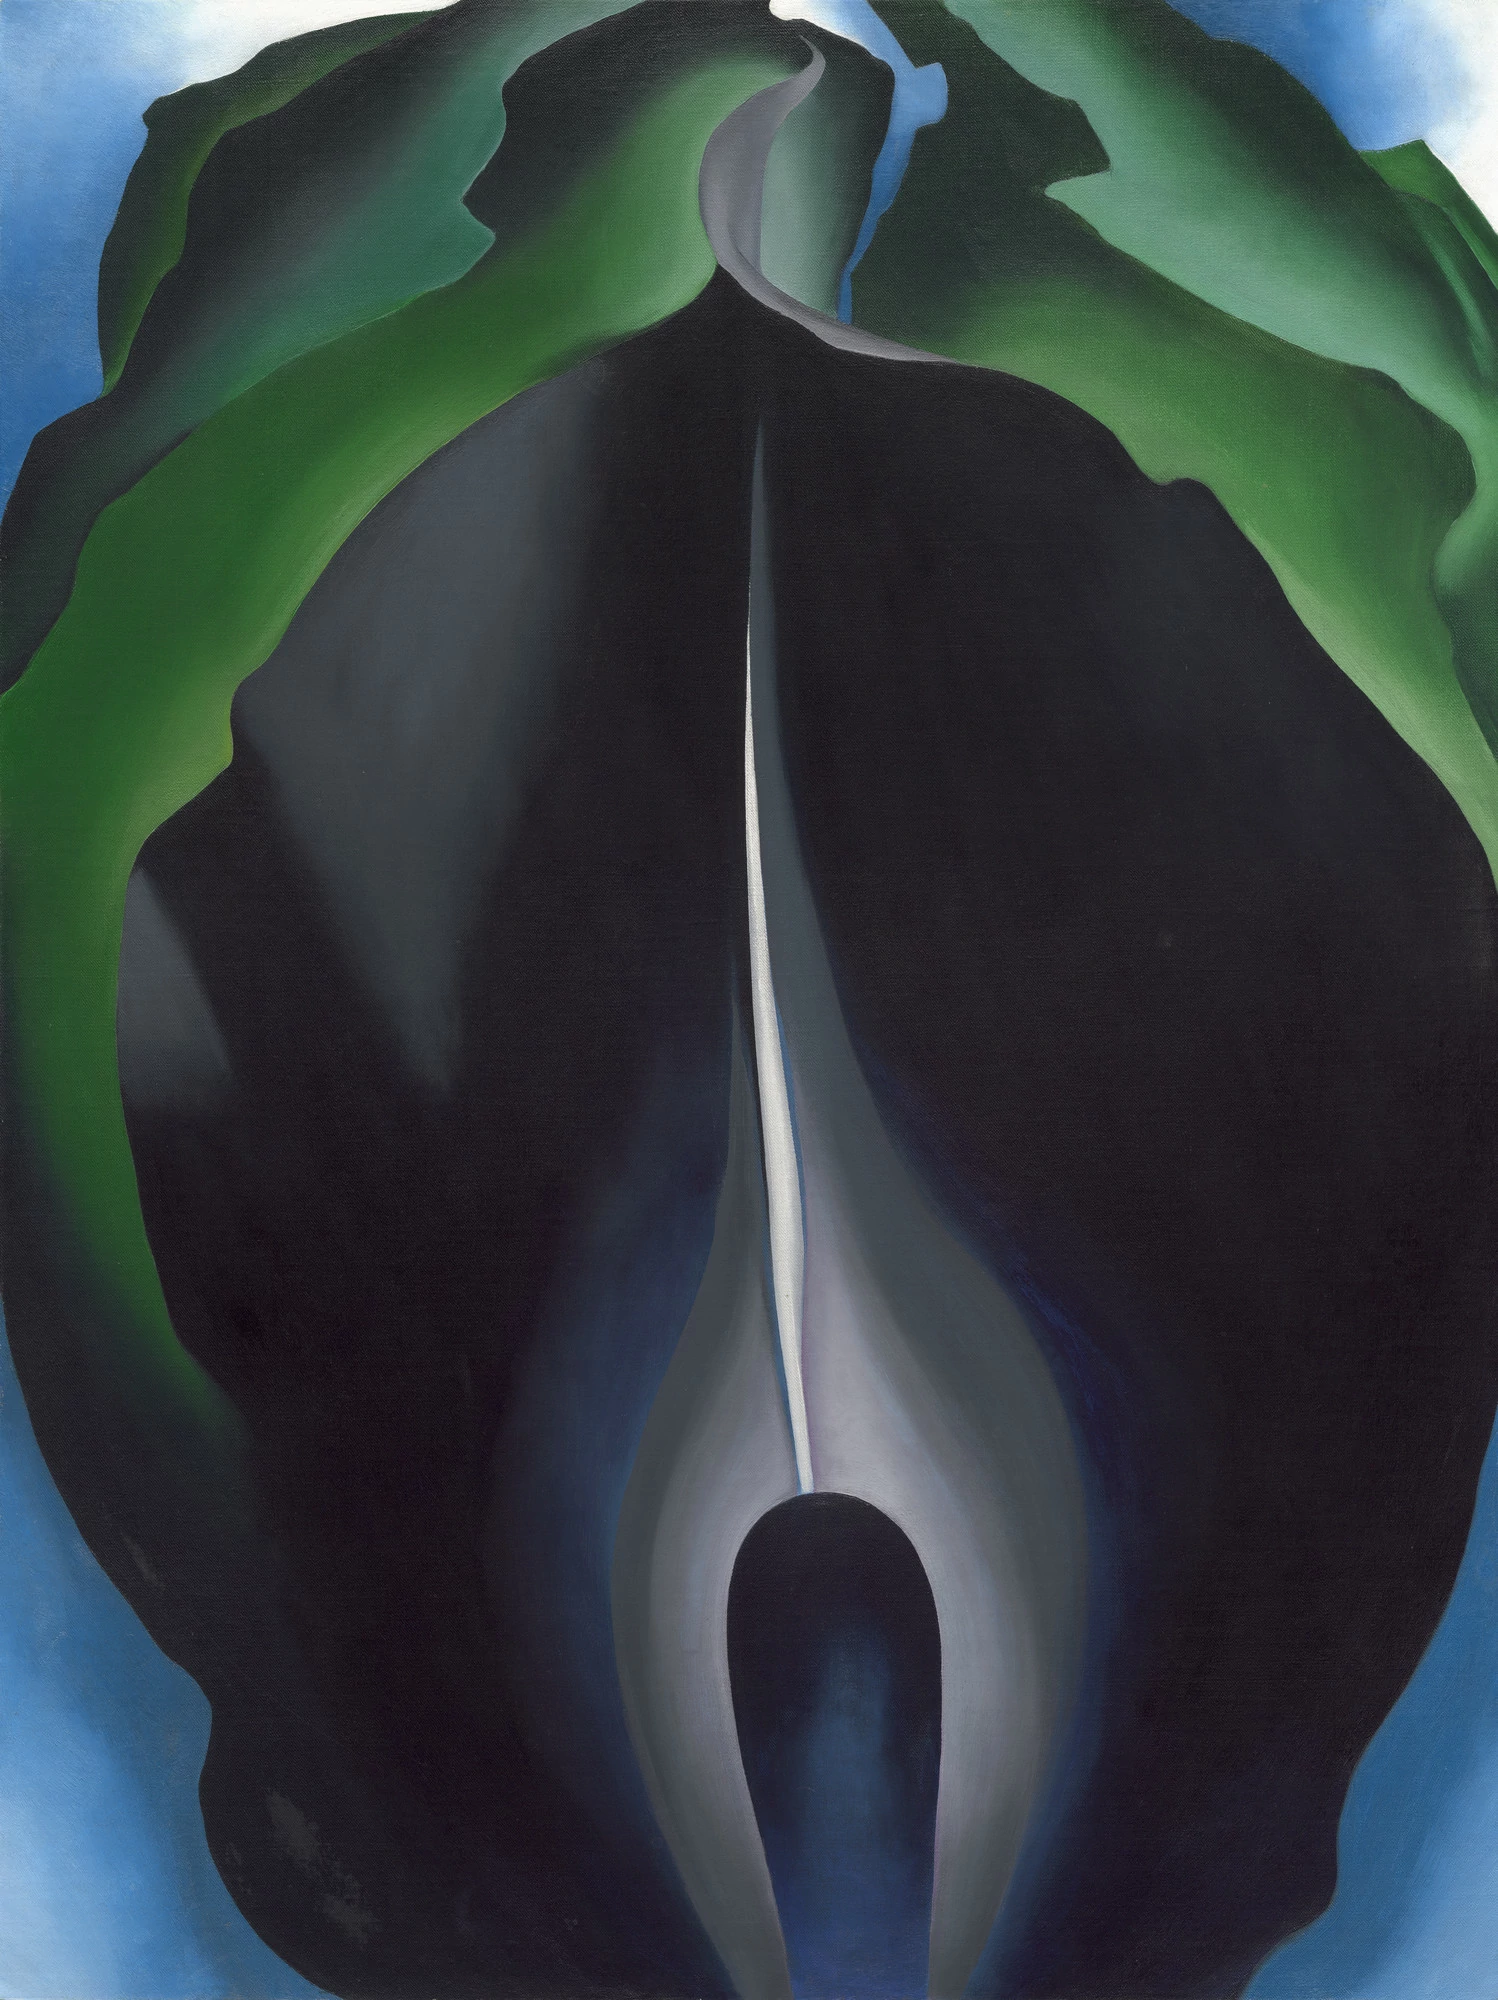 Jack-in-the-Pulpit No. 4, Georgia O'Keeffe